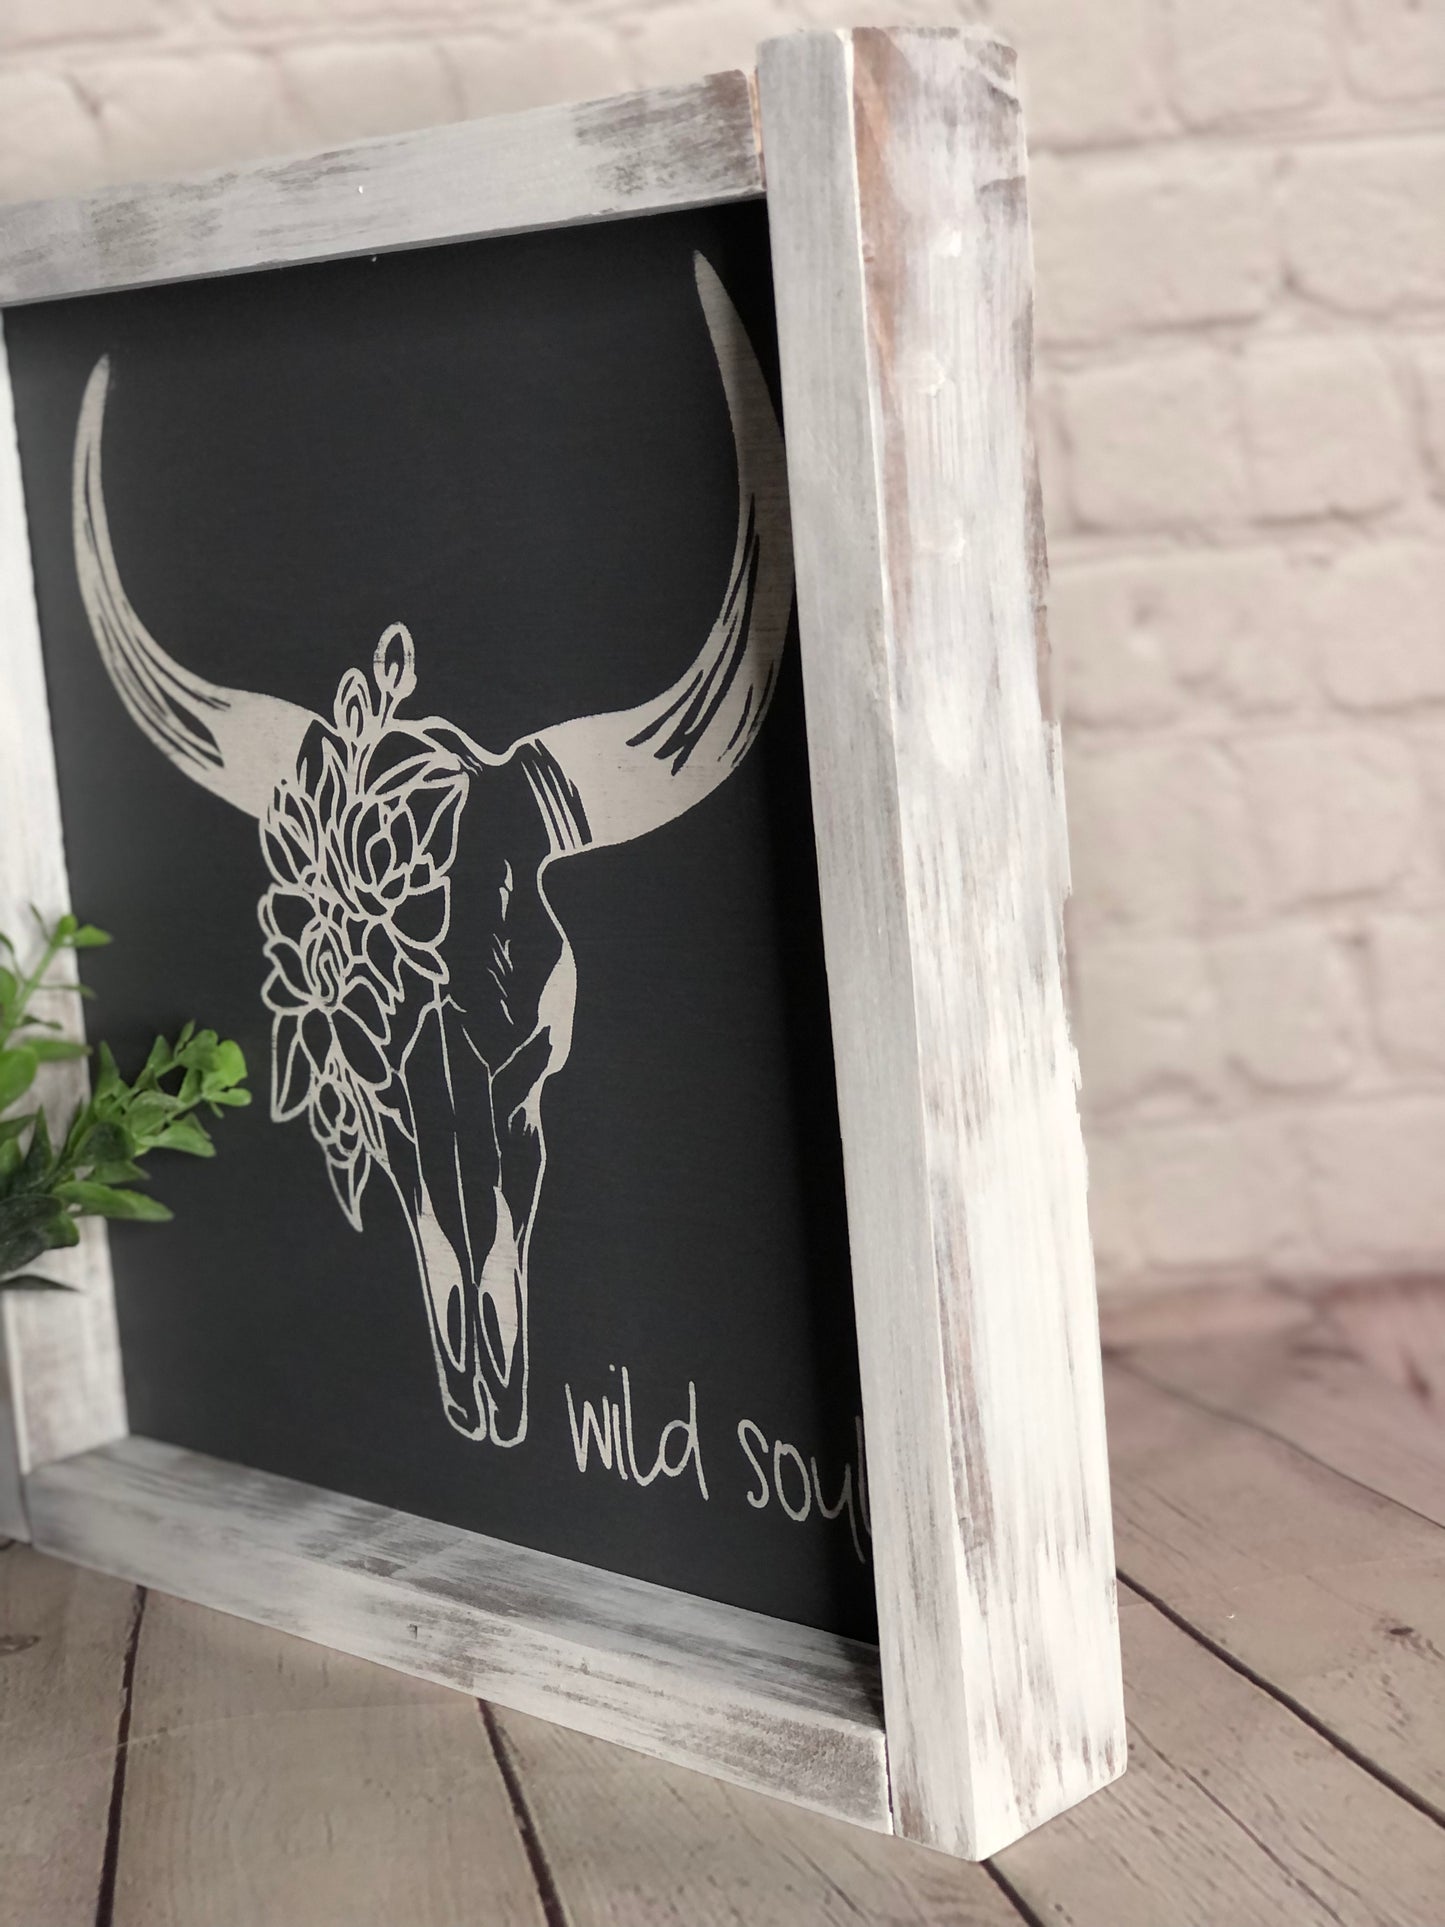 COW SKULL WITH FLOWERS WILD SOUL -FRAMED WOOD SIGN